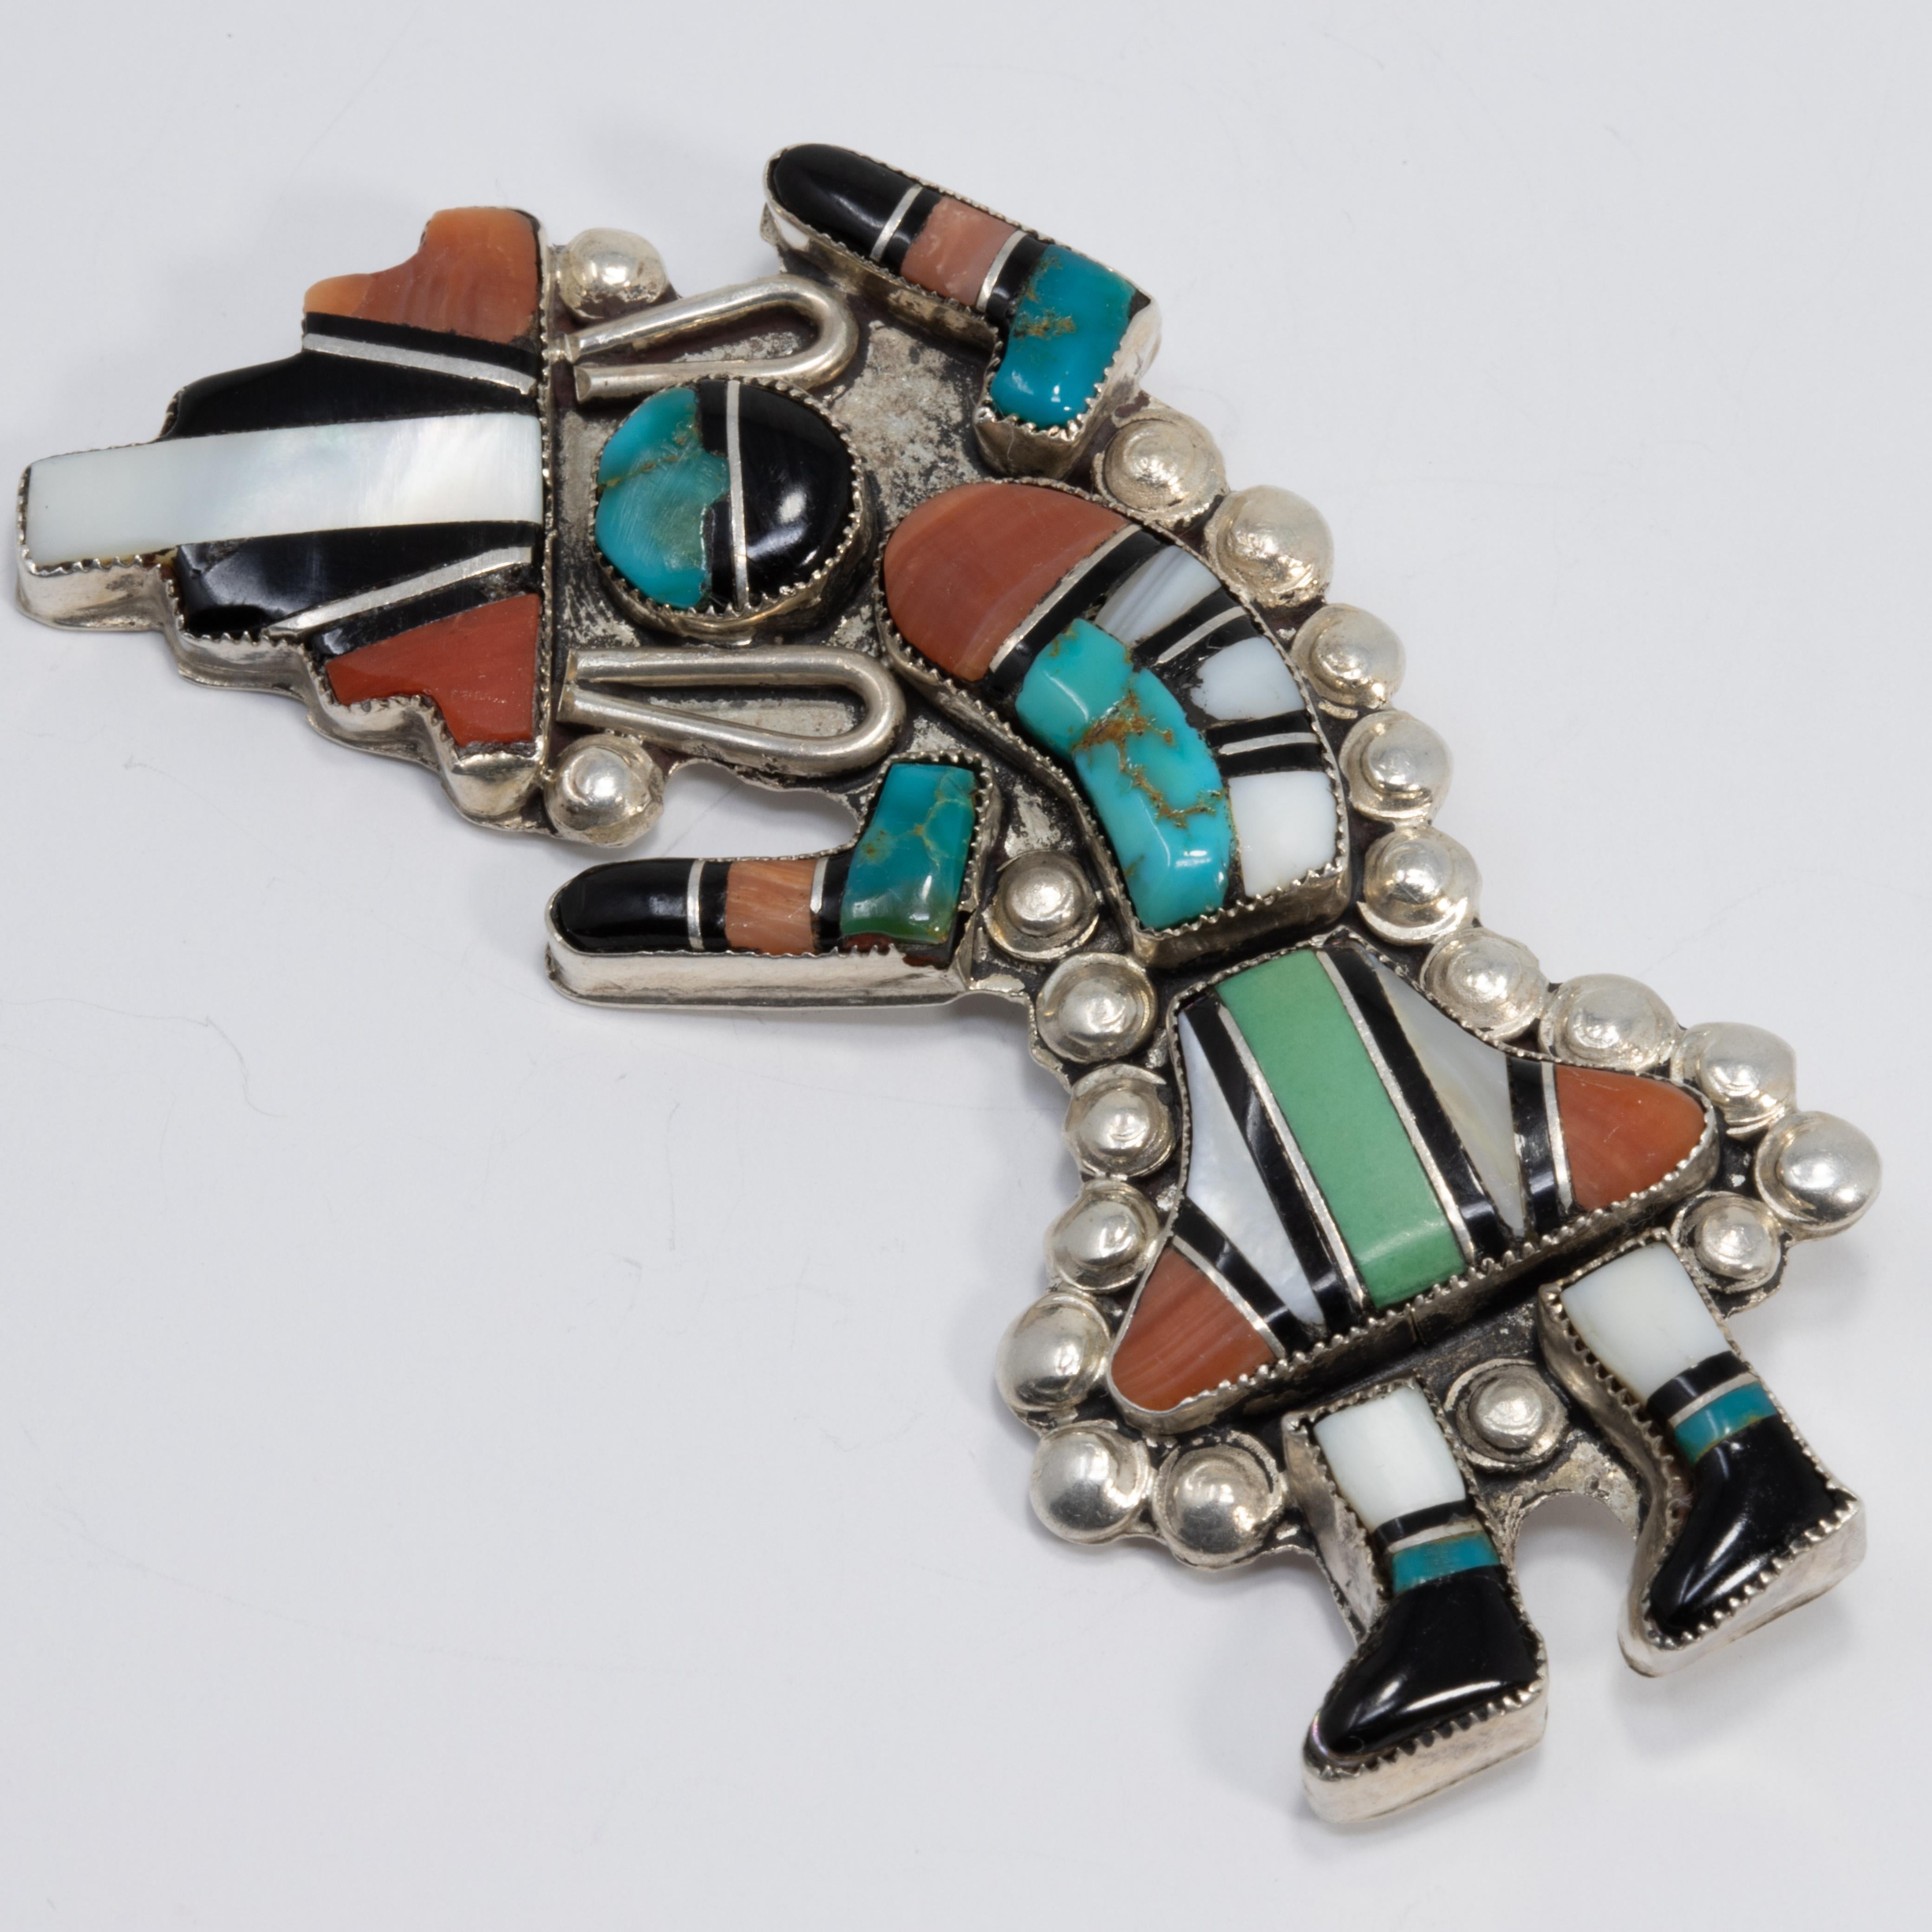 A Native American Zuni dancing man pin featuring mosaic-style turquoise, coral, jet, and mother of pearl inlays bezel-set in a sterling silver setting. A depiction of the symbolic and well-known Indian rainbow god design popular with Native American